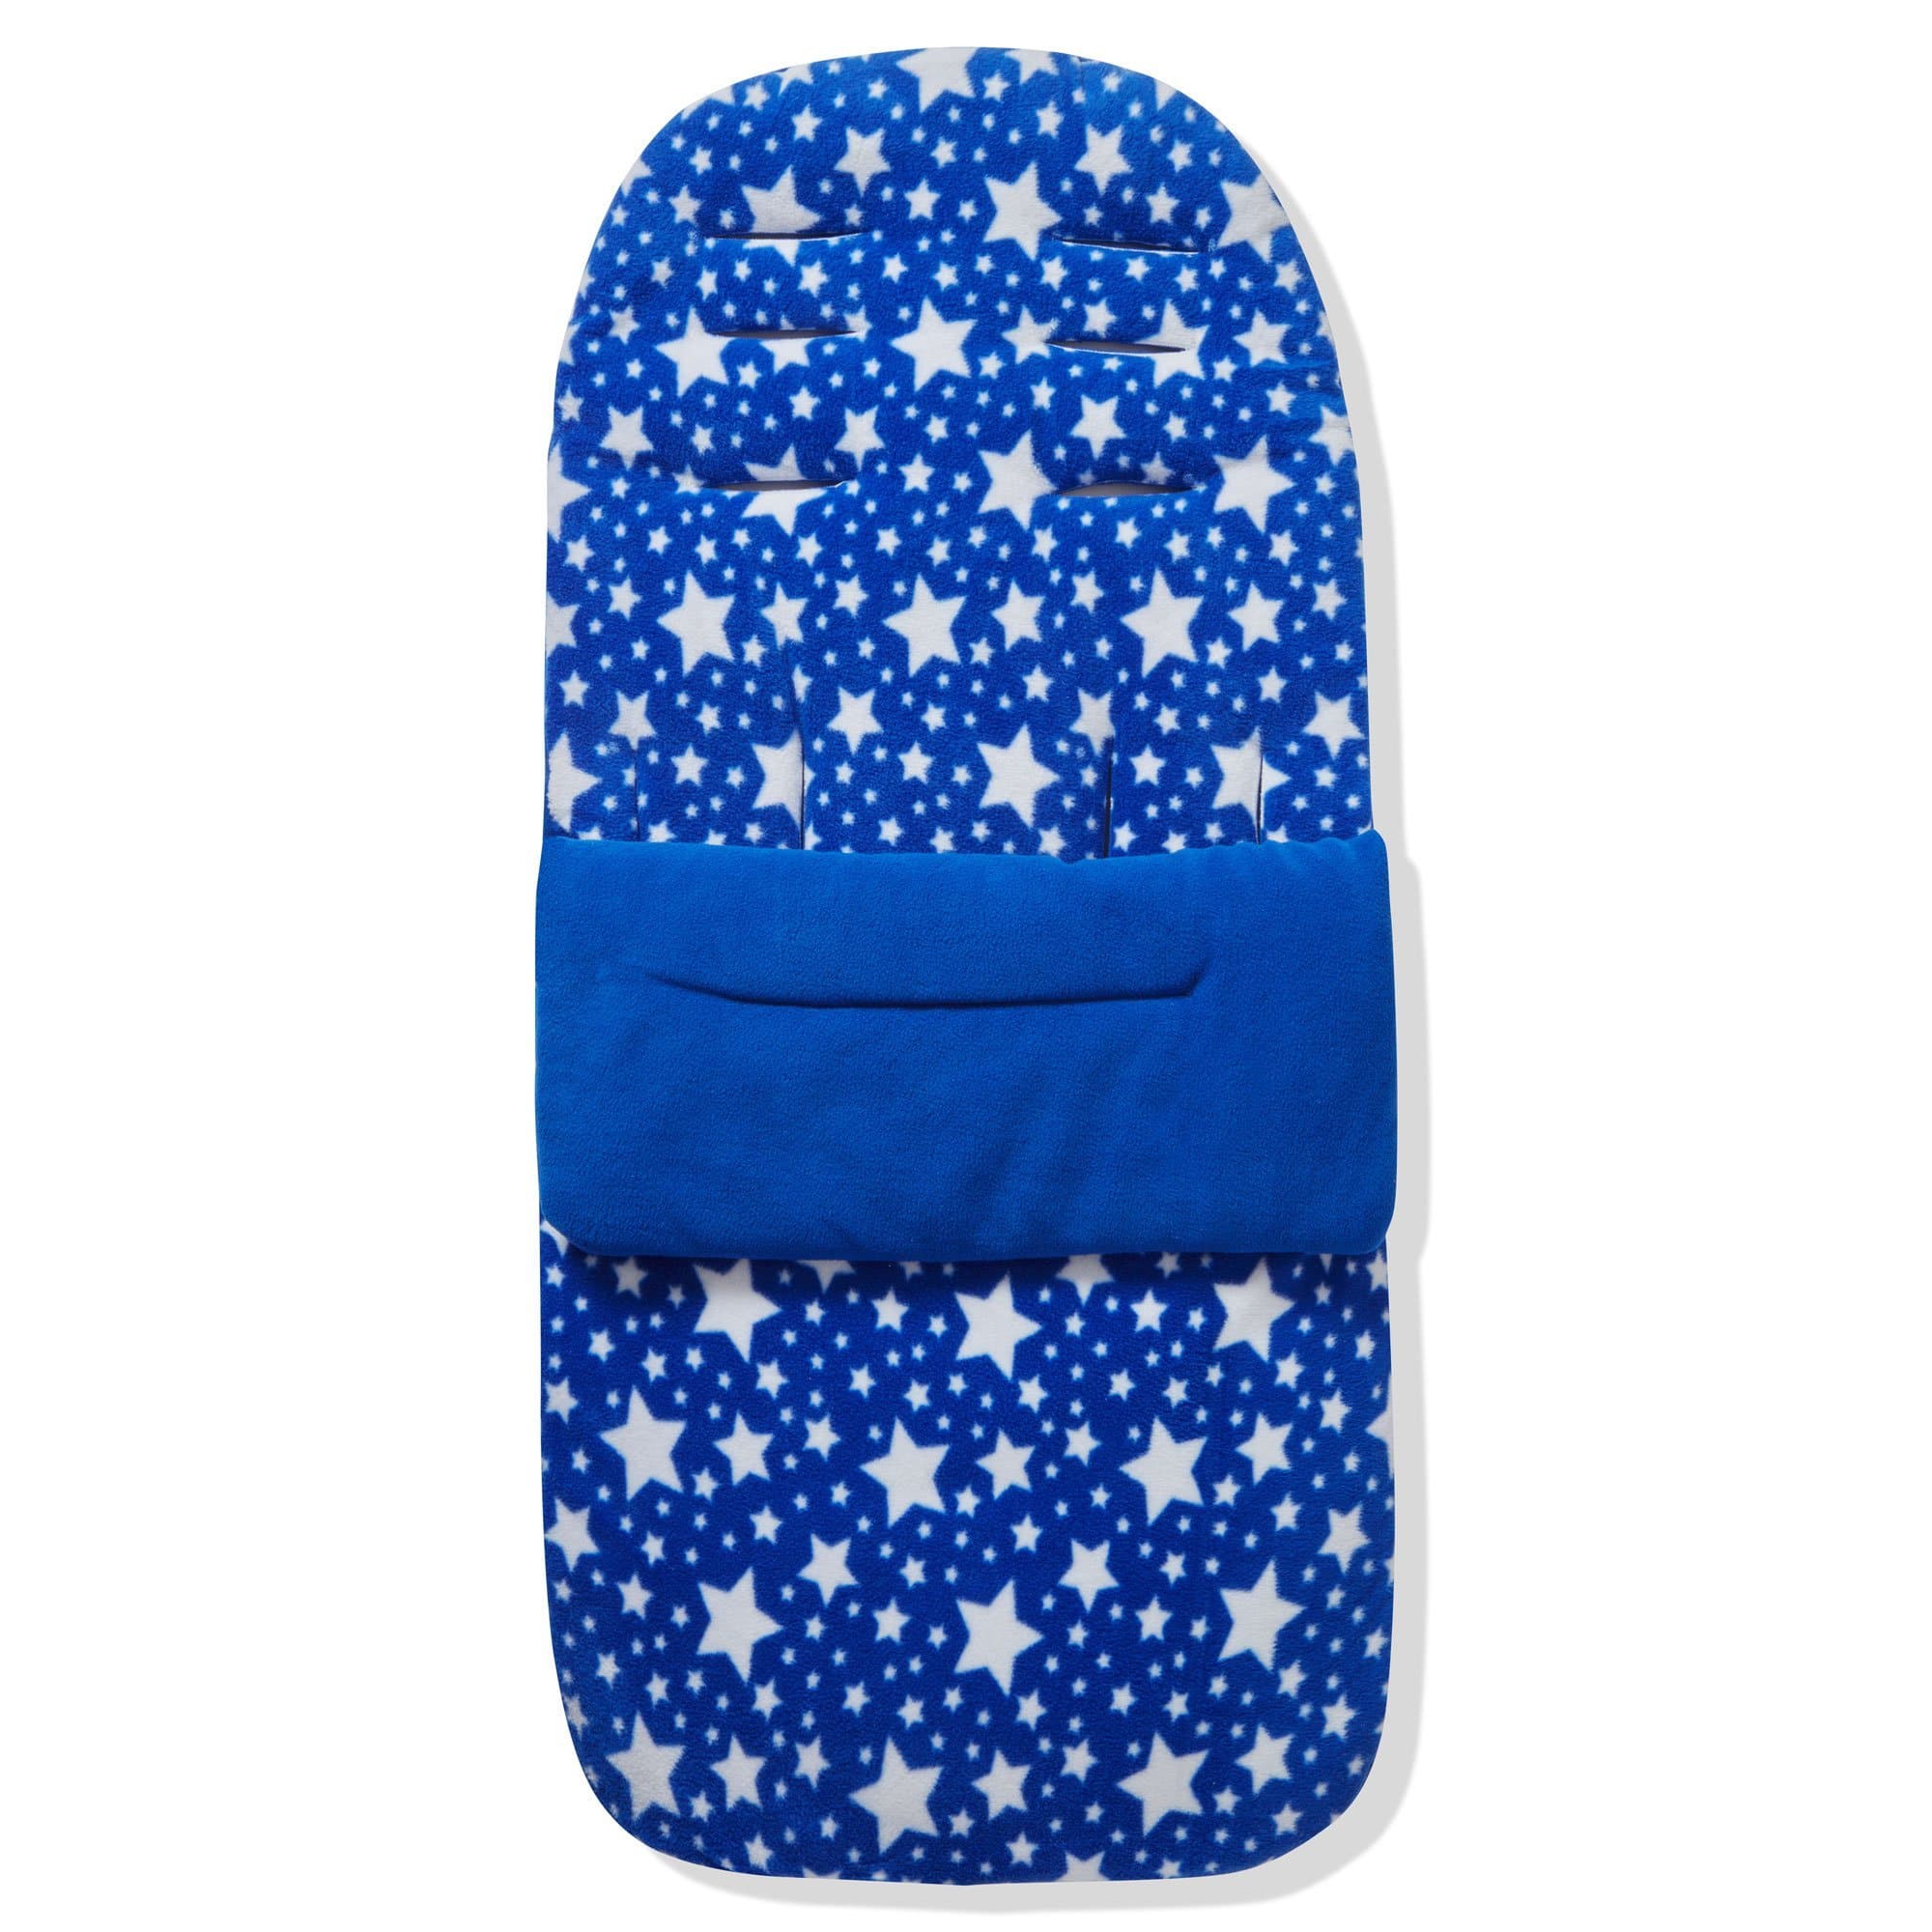 Fleece Footmuff / Cosy Toes Compatible With Cosatto - For Your Little One